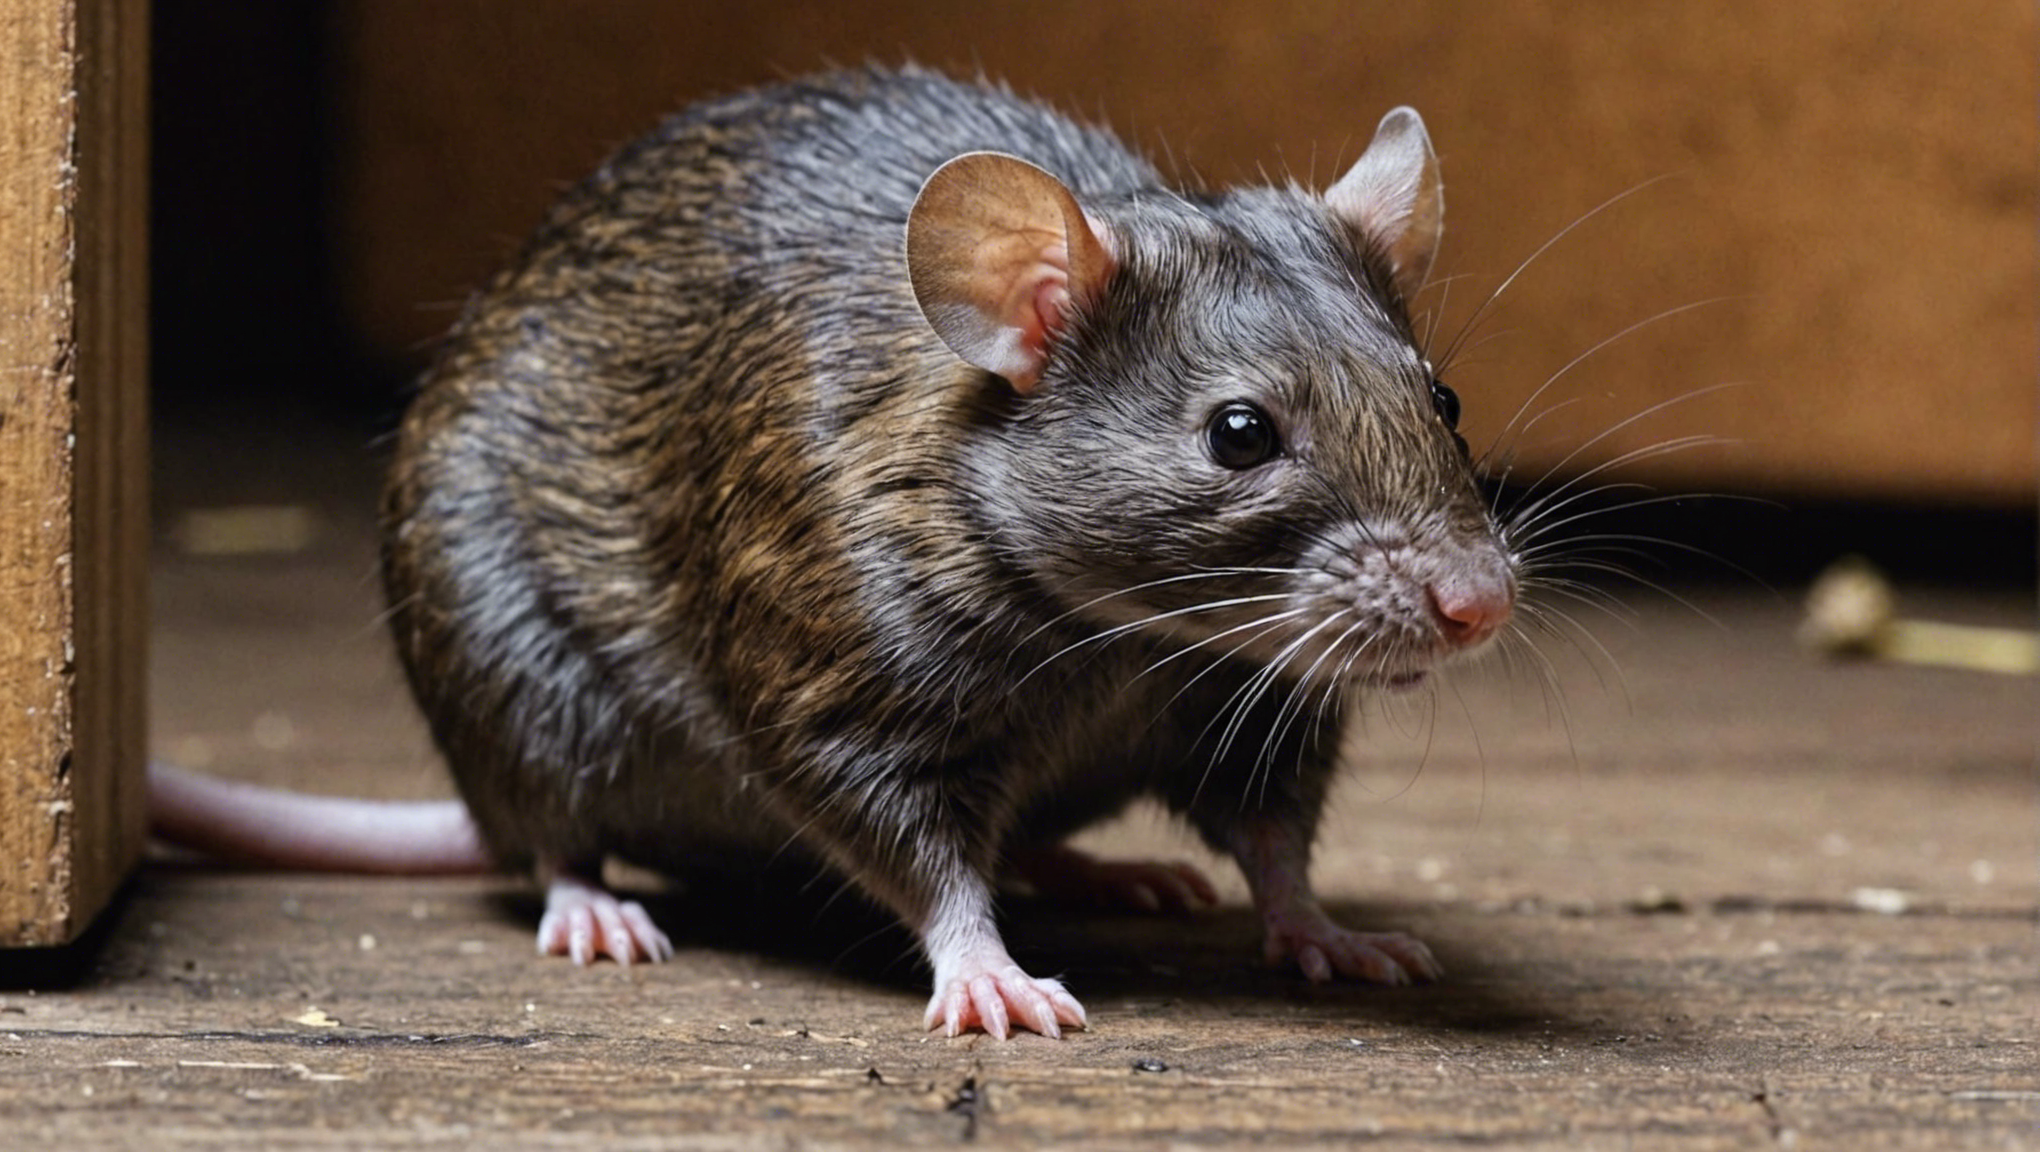 learn how to keep rats and mice out of your home with these effective sealing tips for the winter season.